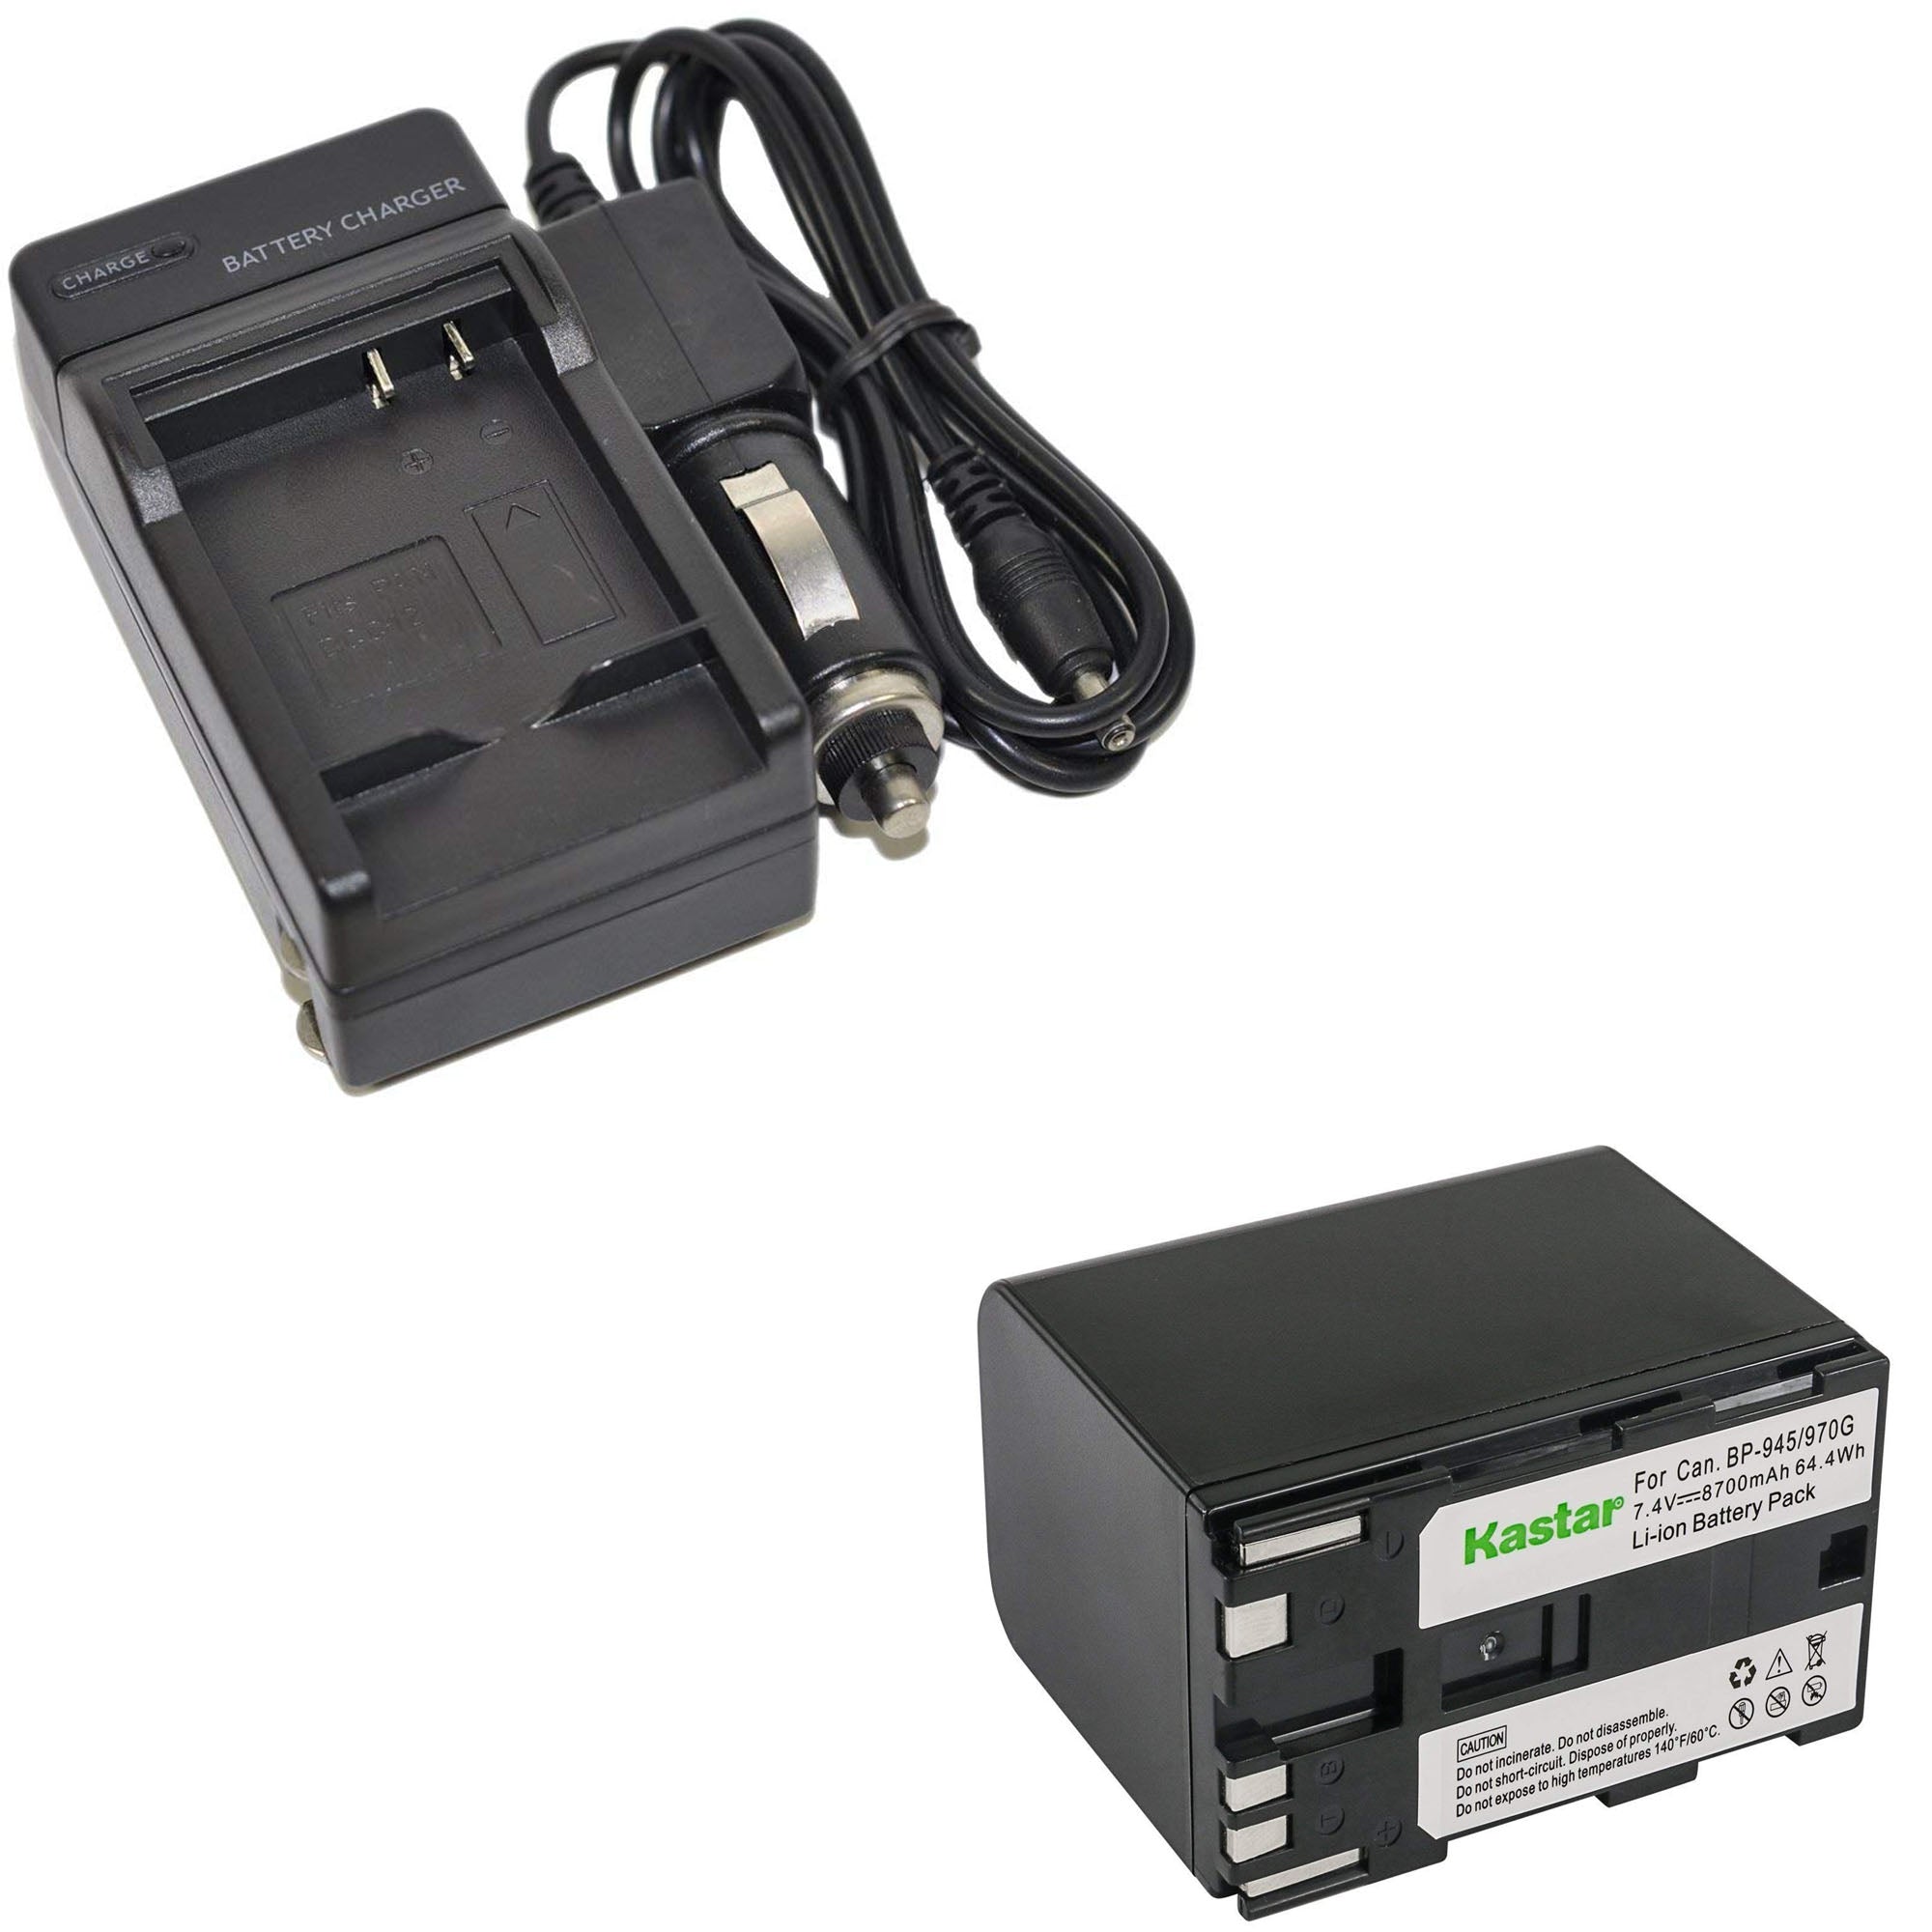 salat ækvator Reception BP-911 Battery Charger & Battery for Canon BP-970G, BP-975 and Canon EOS  C100, EOS C100 Mark II, EOS C300, EOS C300 PL, EOS C500, EOS C500 PL, GL2,  XF100, XF105, XF200, XF205,